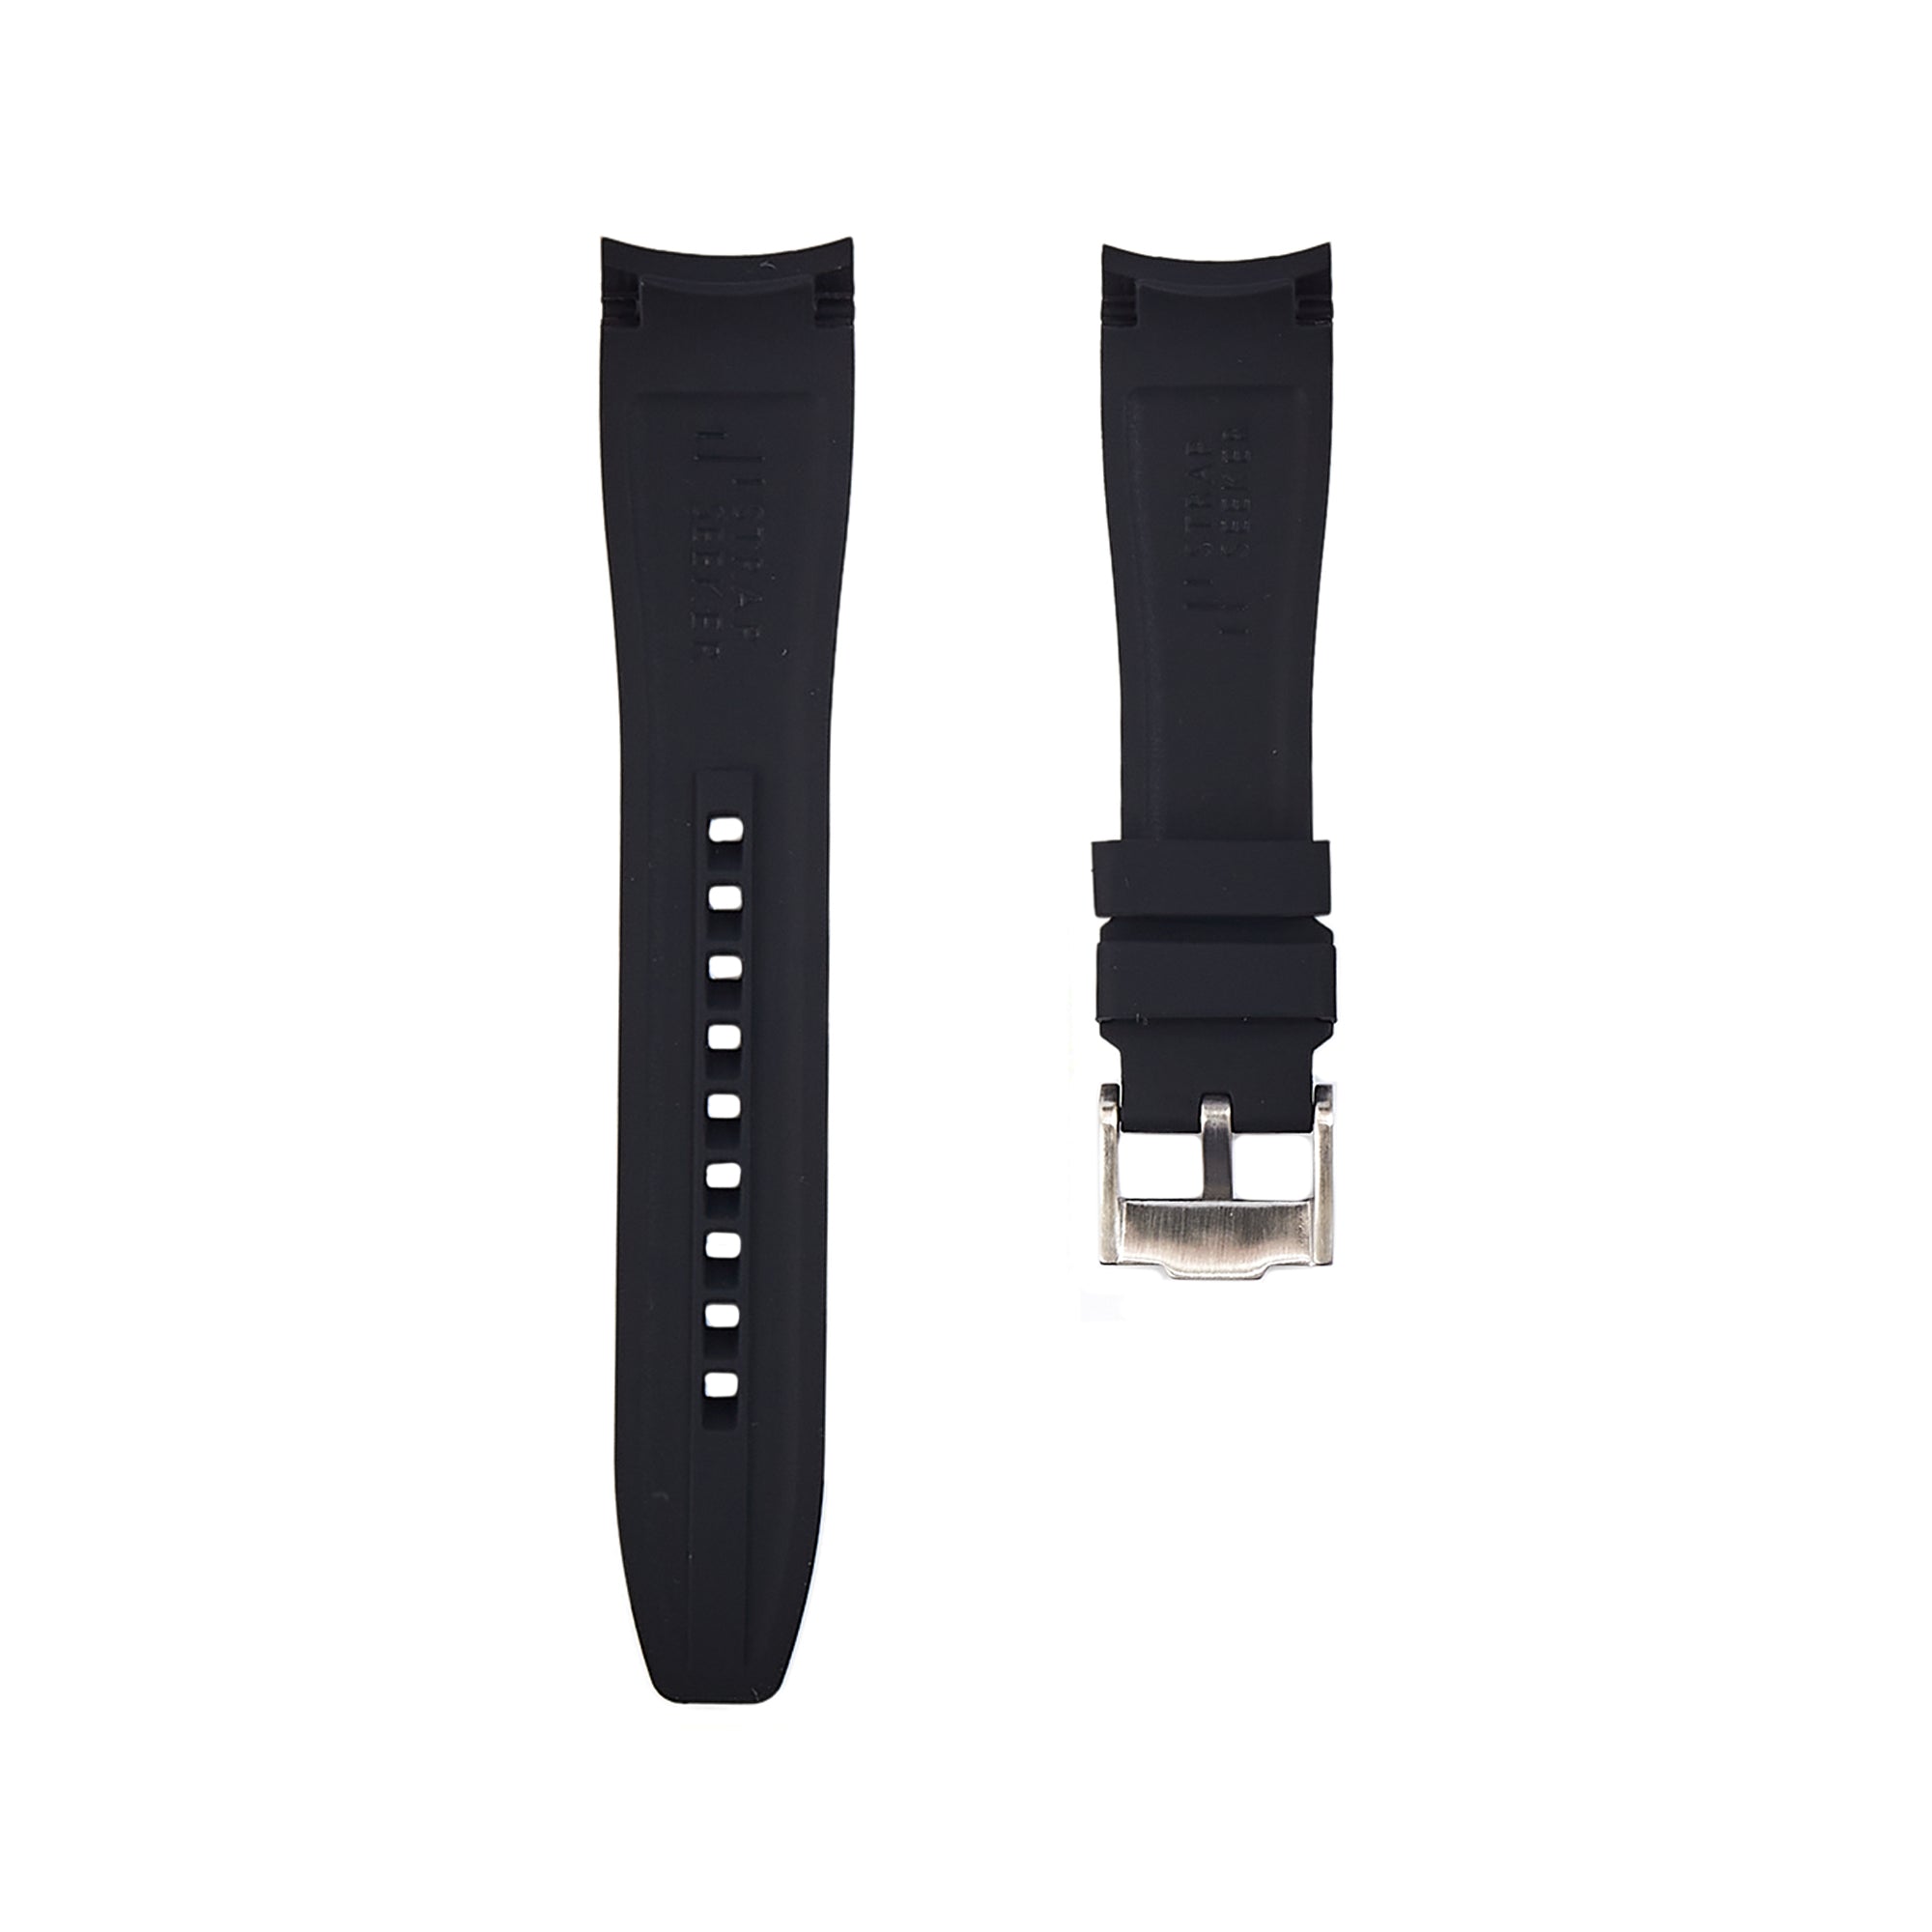 Curved End Soft Silicone Strap - Compatible with Omega Moonwatch - Black